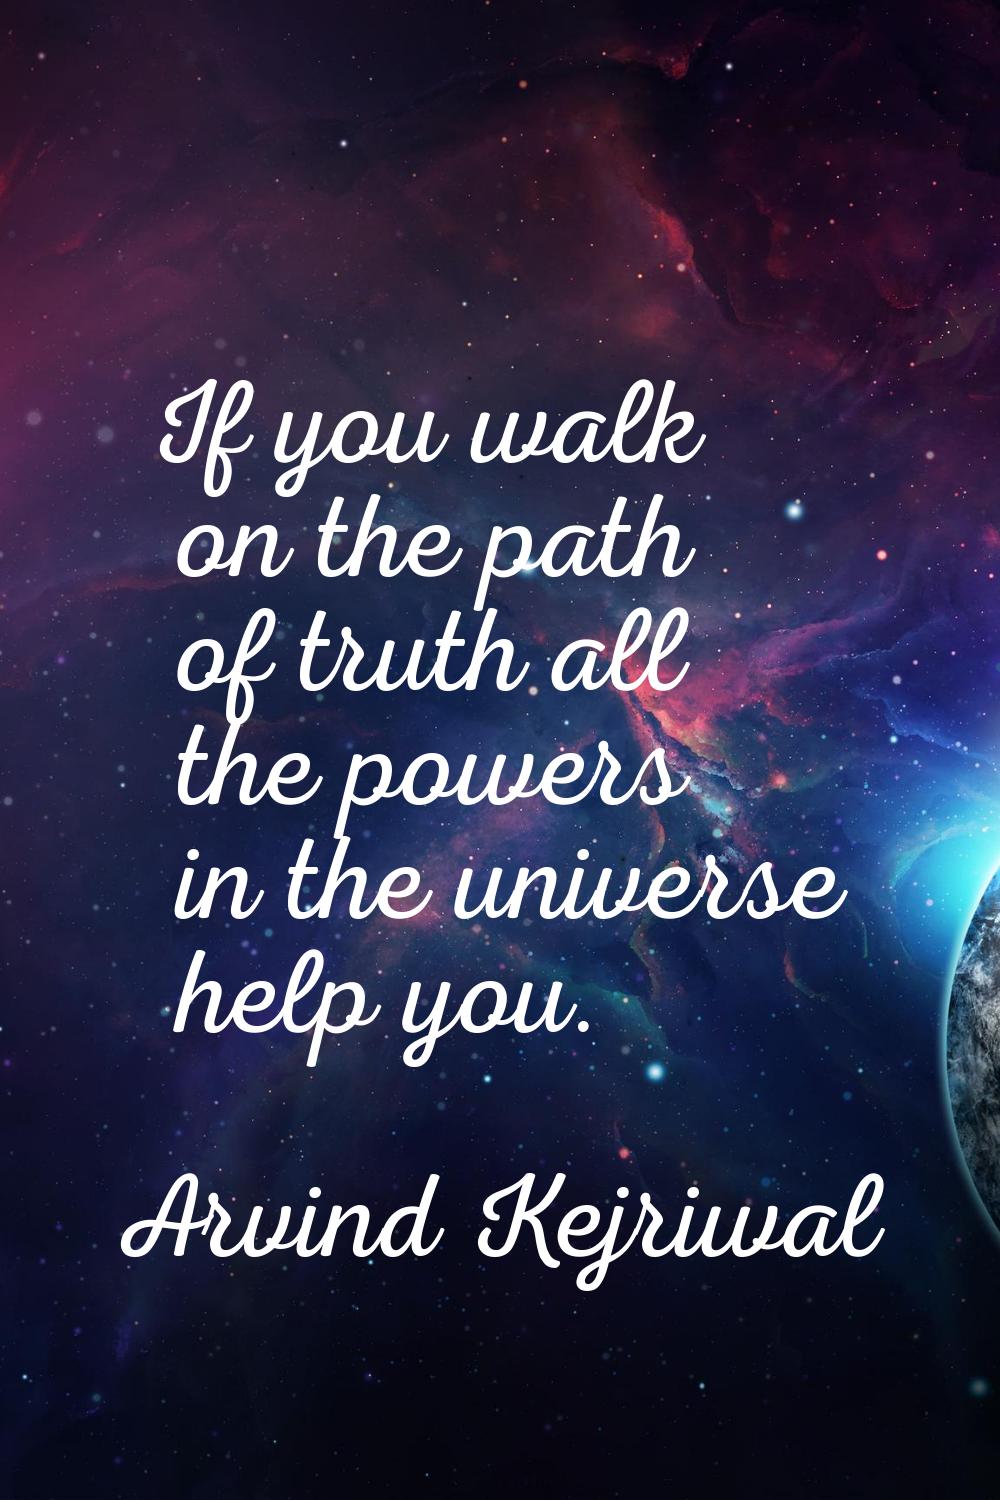 If you walk on the path of truth all the powers in the universe help you.